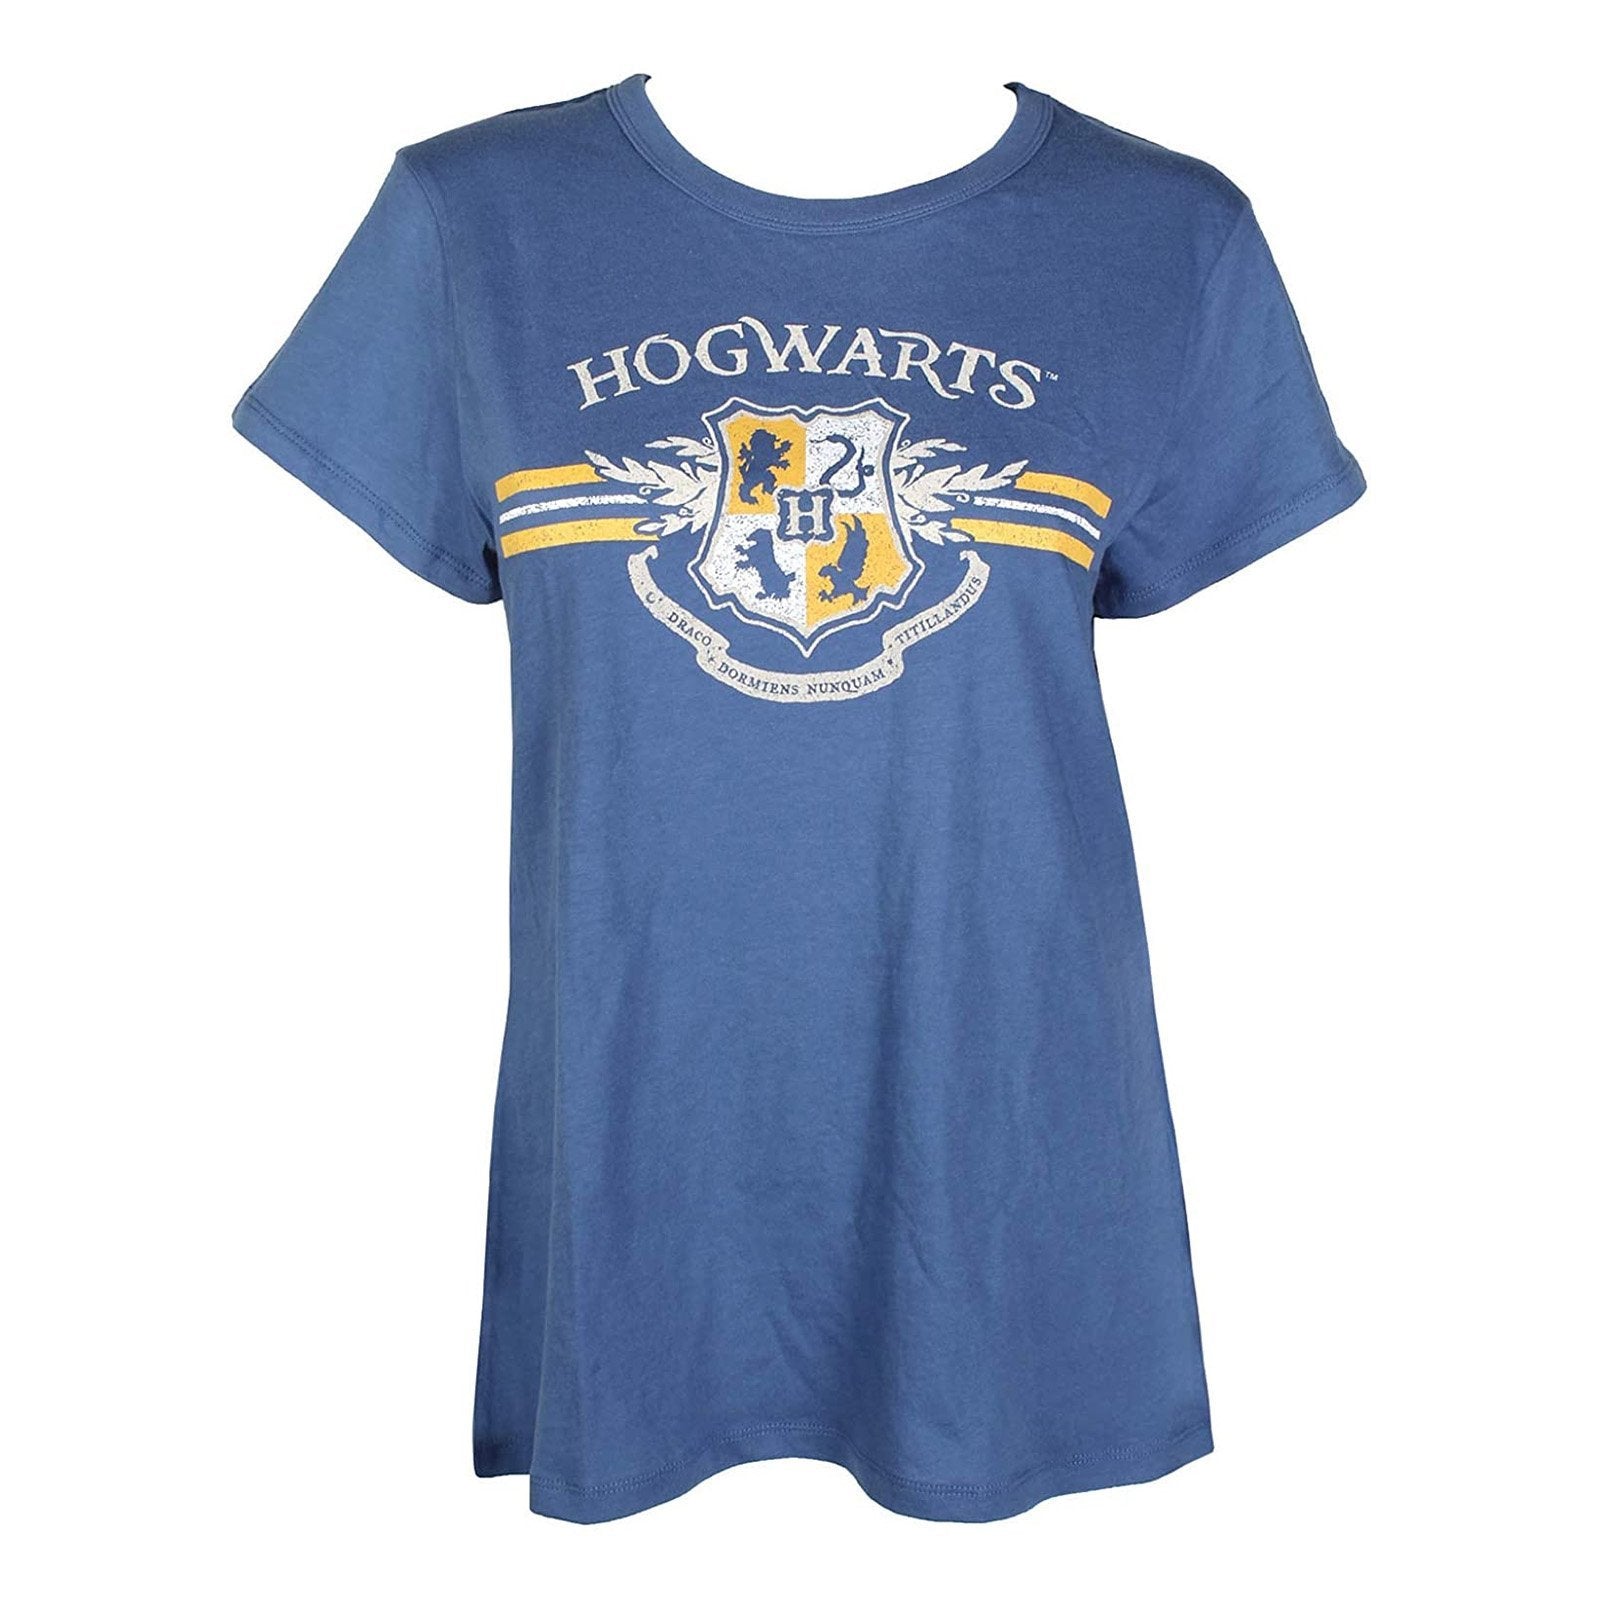 Women Junior\'s Blue Harry Potter Sporting Licensed T-shirts, Hogwarts T-Shirt Rex and goods, Products Distributor, Crest – Inc. Wholesale Graphic Tee